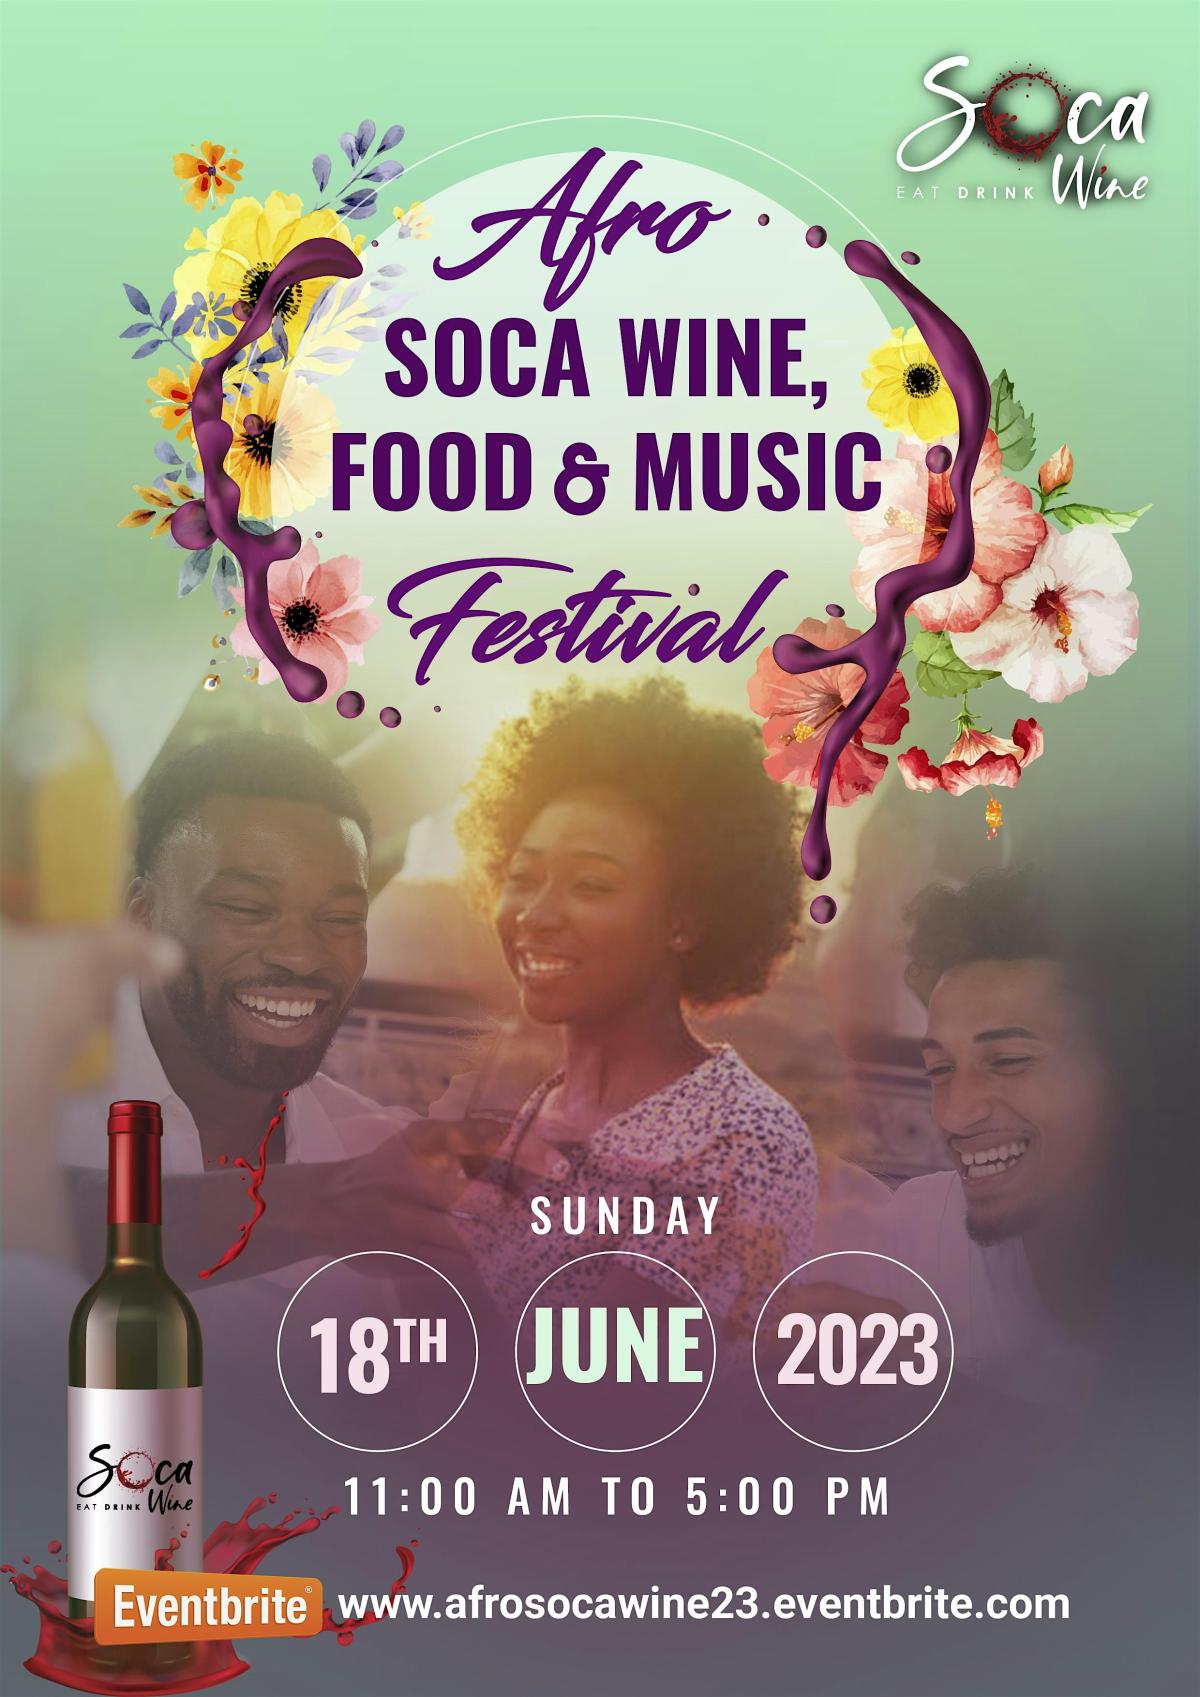 Afro Soca Wine Festival flyer or graphic.